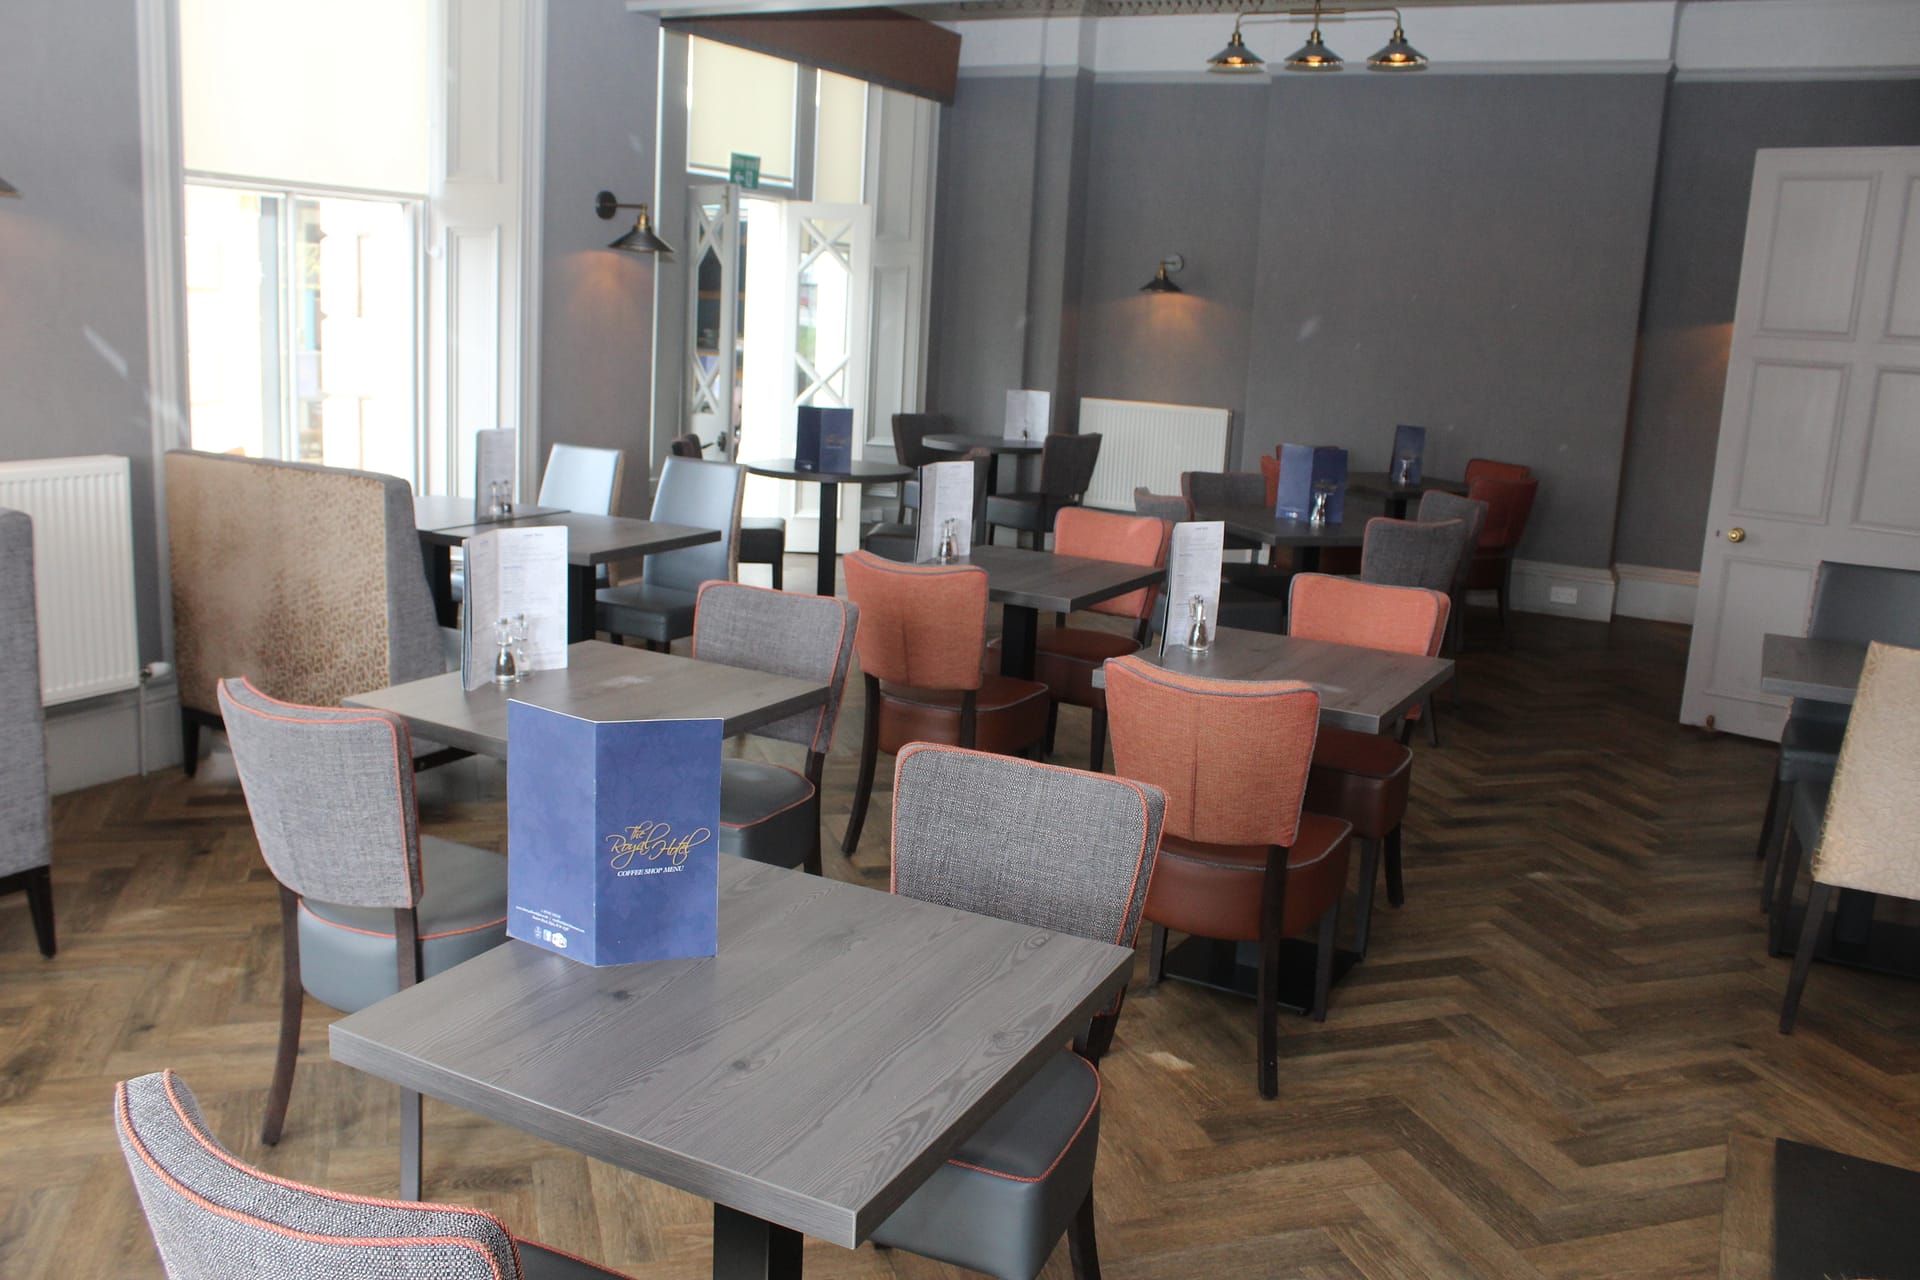 Elgin restaurant featuring tables and chairs for guests to enjoy their dining experience.